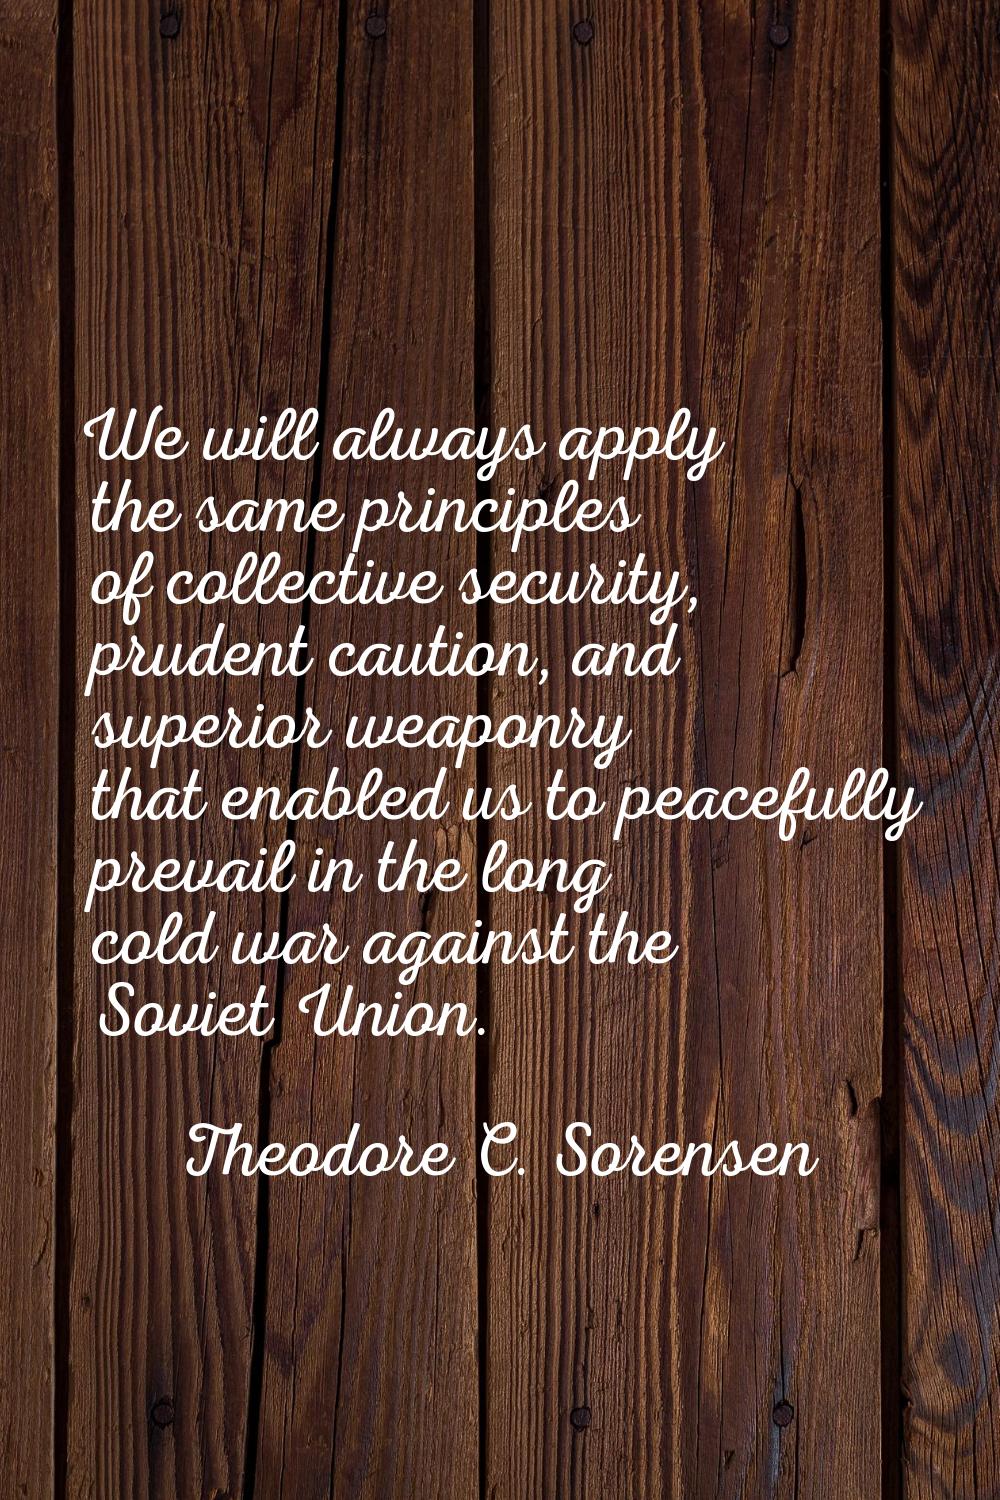 We will always apply the same principles of collective security, prudent caution, and superior weap